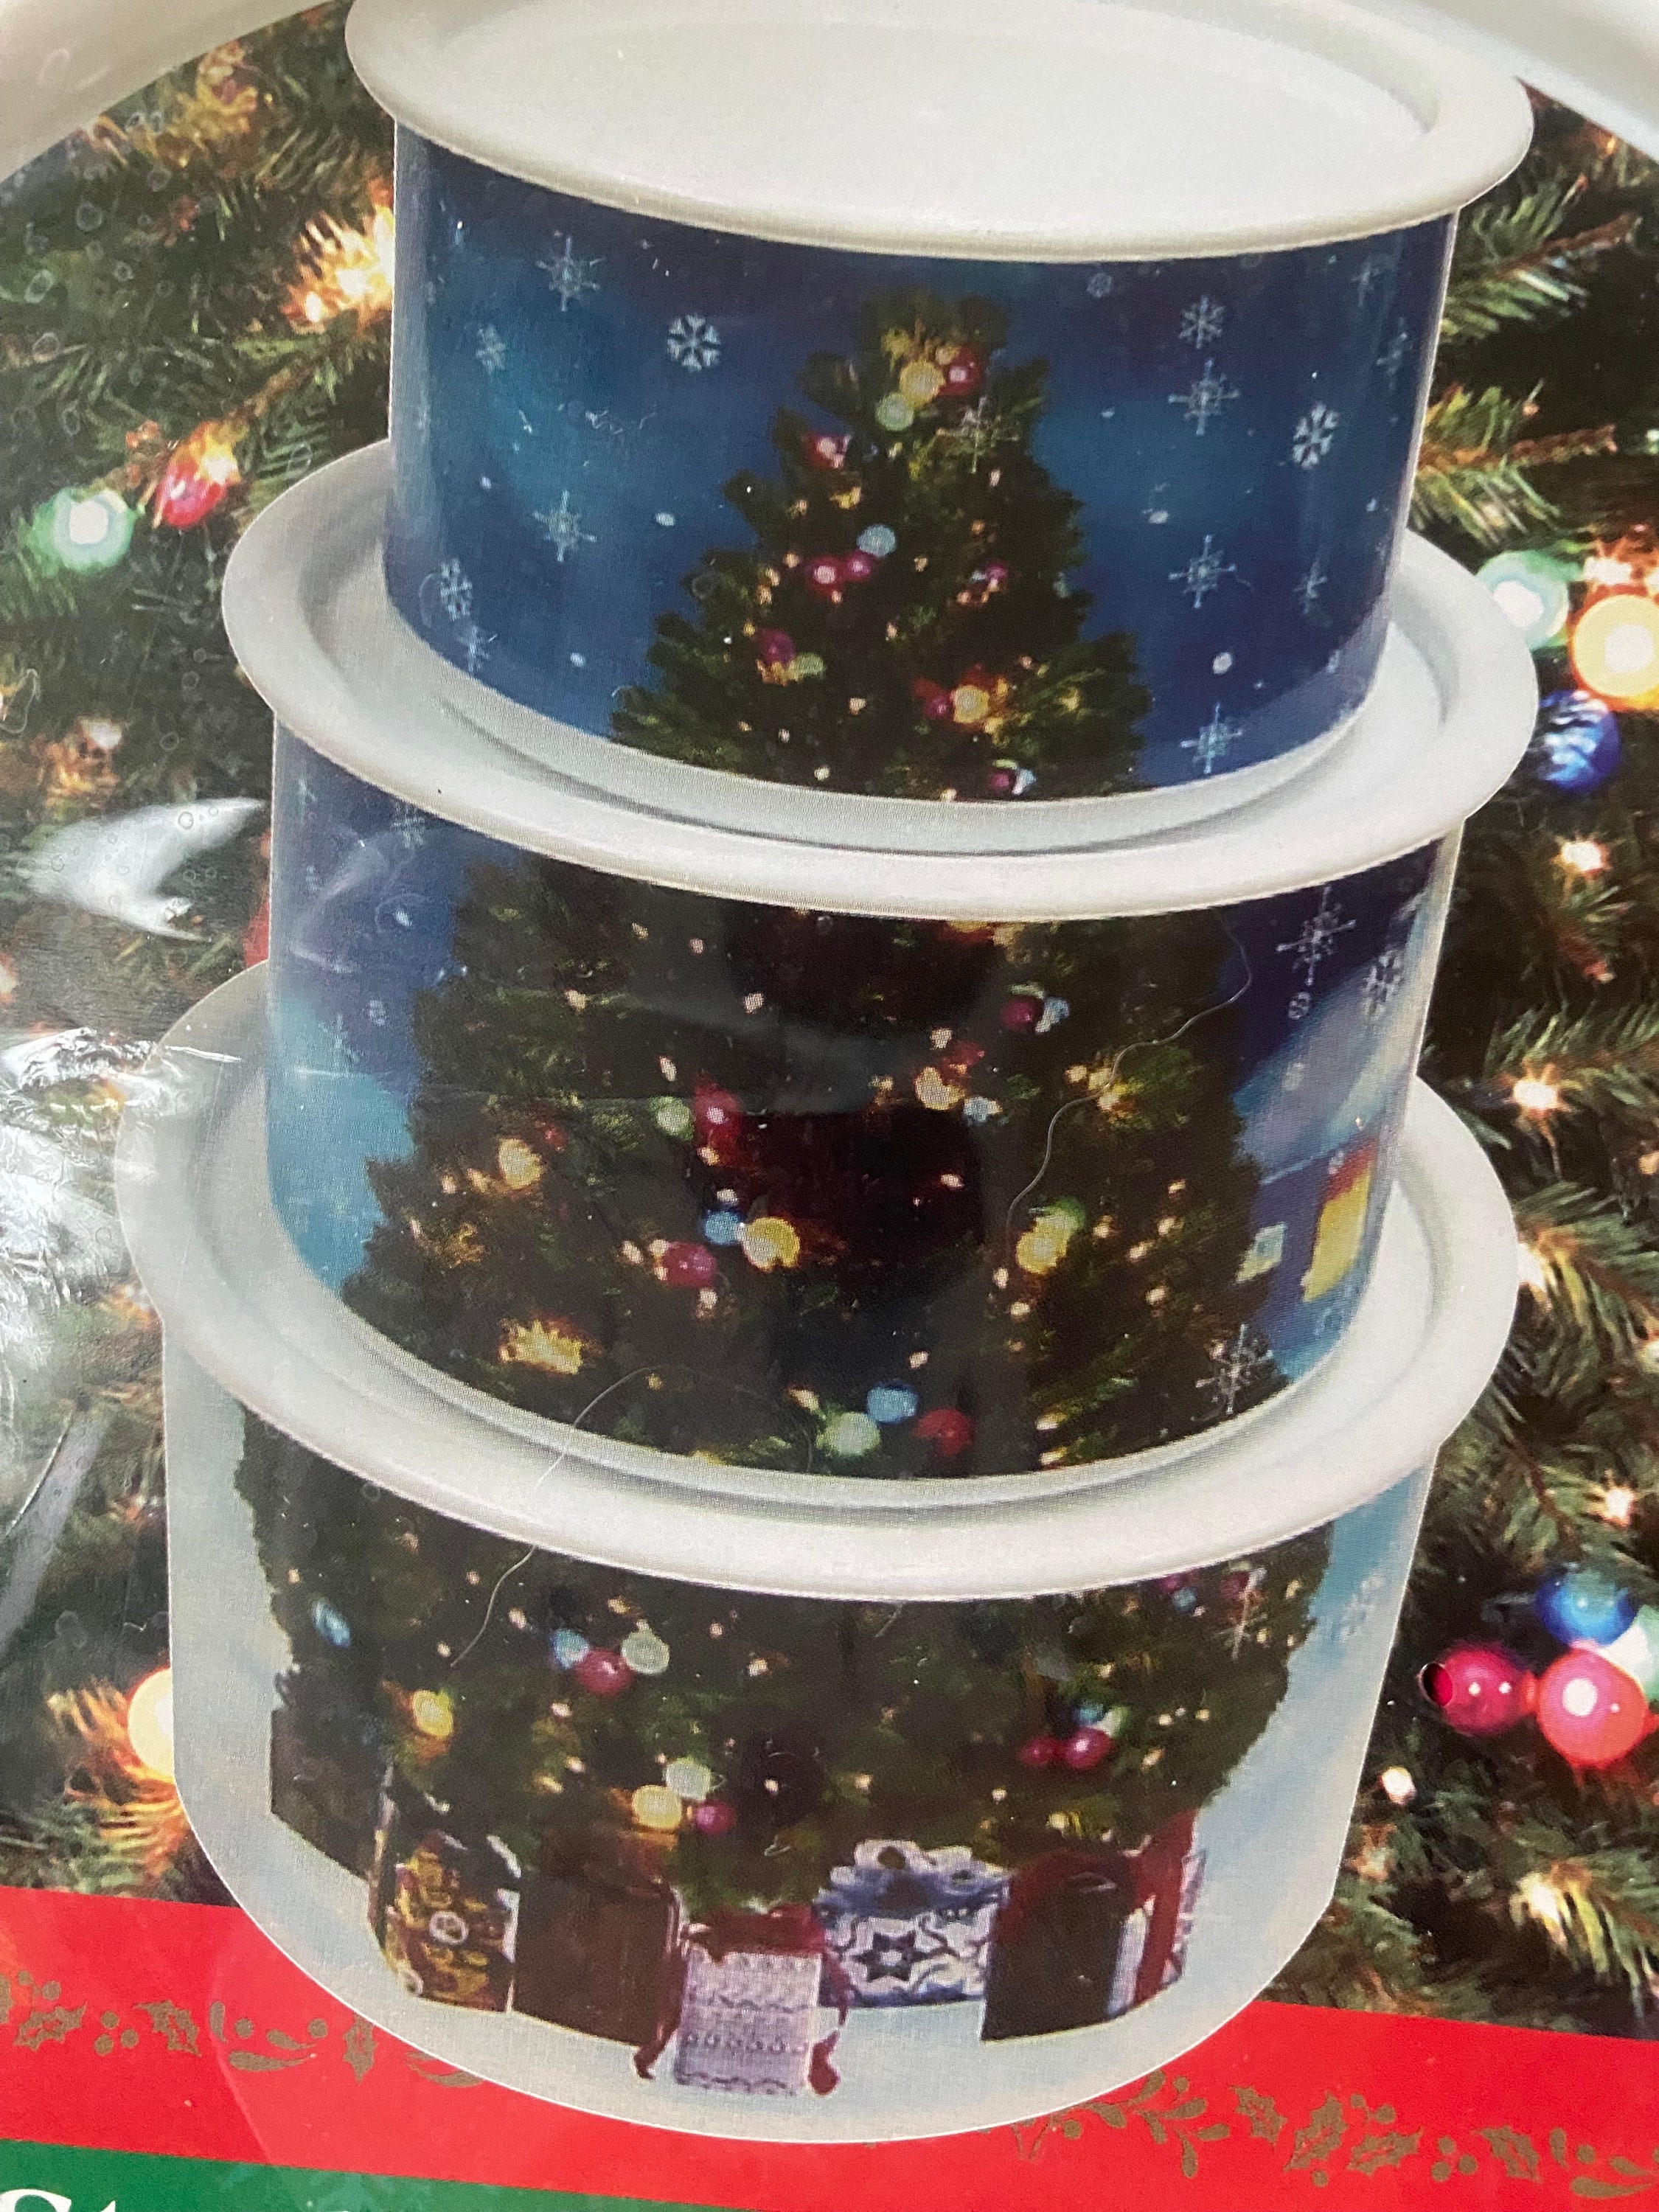 Set of 2 Acrylic Containers Stackable Christmas Holiday Cookies Treats &  More